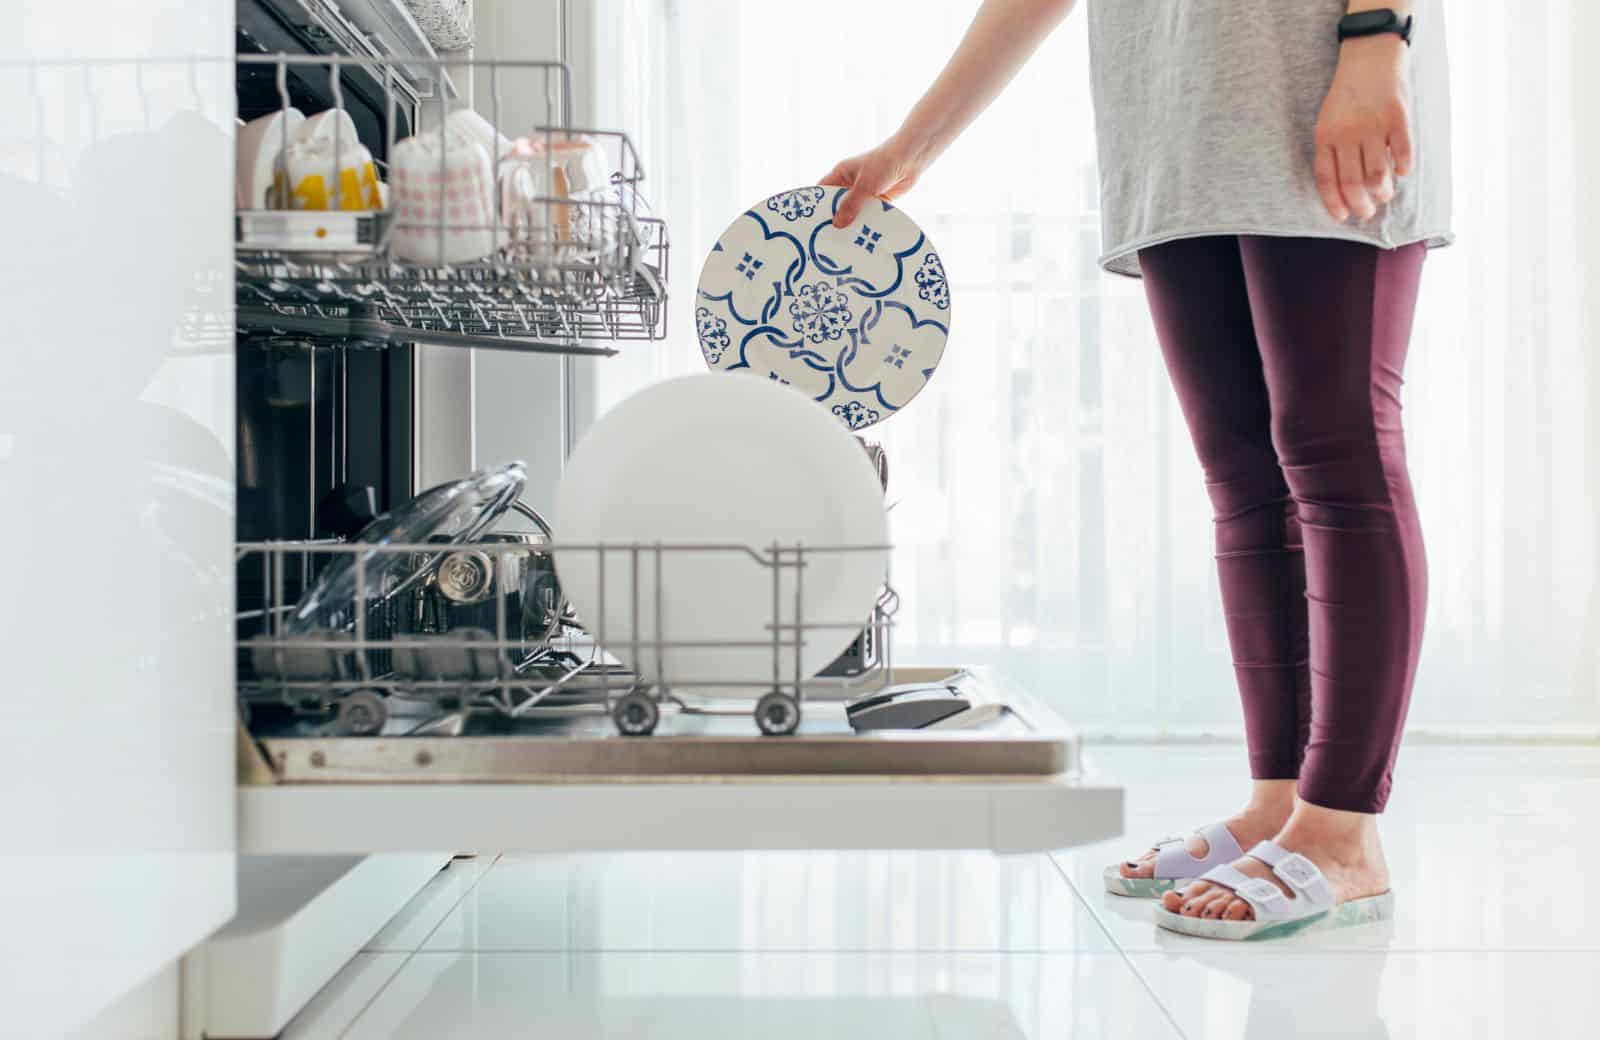 Your Dishwasher Could Be Damaging Your Baking Sheets. Here's How